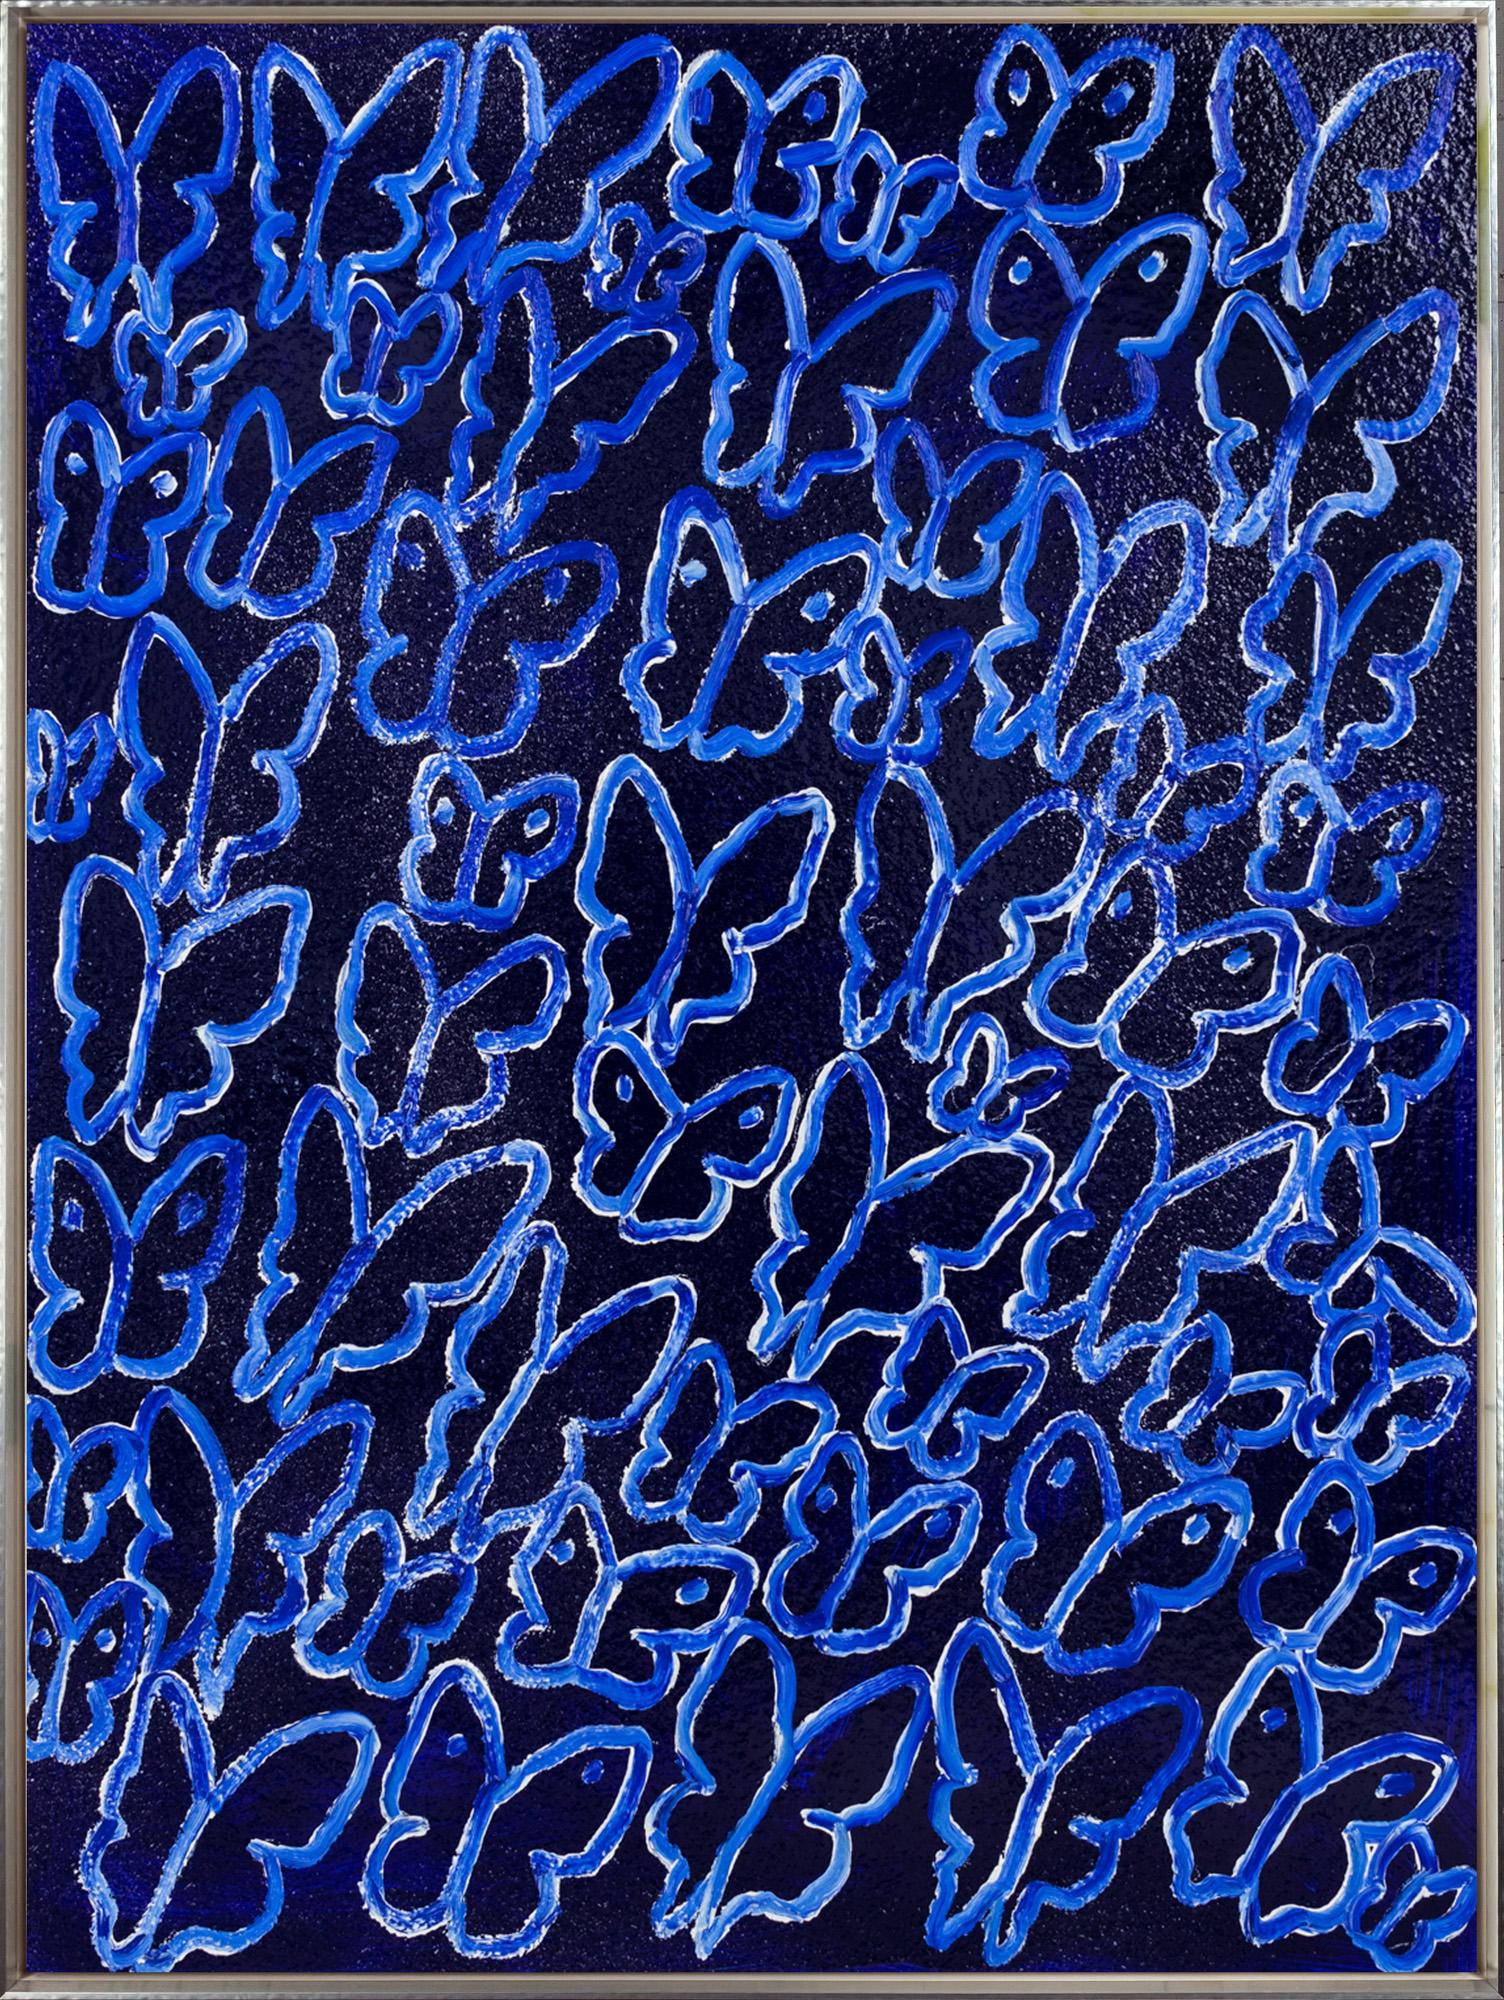 "Untitled" is a framed acrylic and oil painting on canvas by Hunt Slonem, depicting a flock of butterflies atop a deep blue Diamond Dust background. 

This piece is finished in a silver floater frame with subtle beveling and a white woodgrain effect